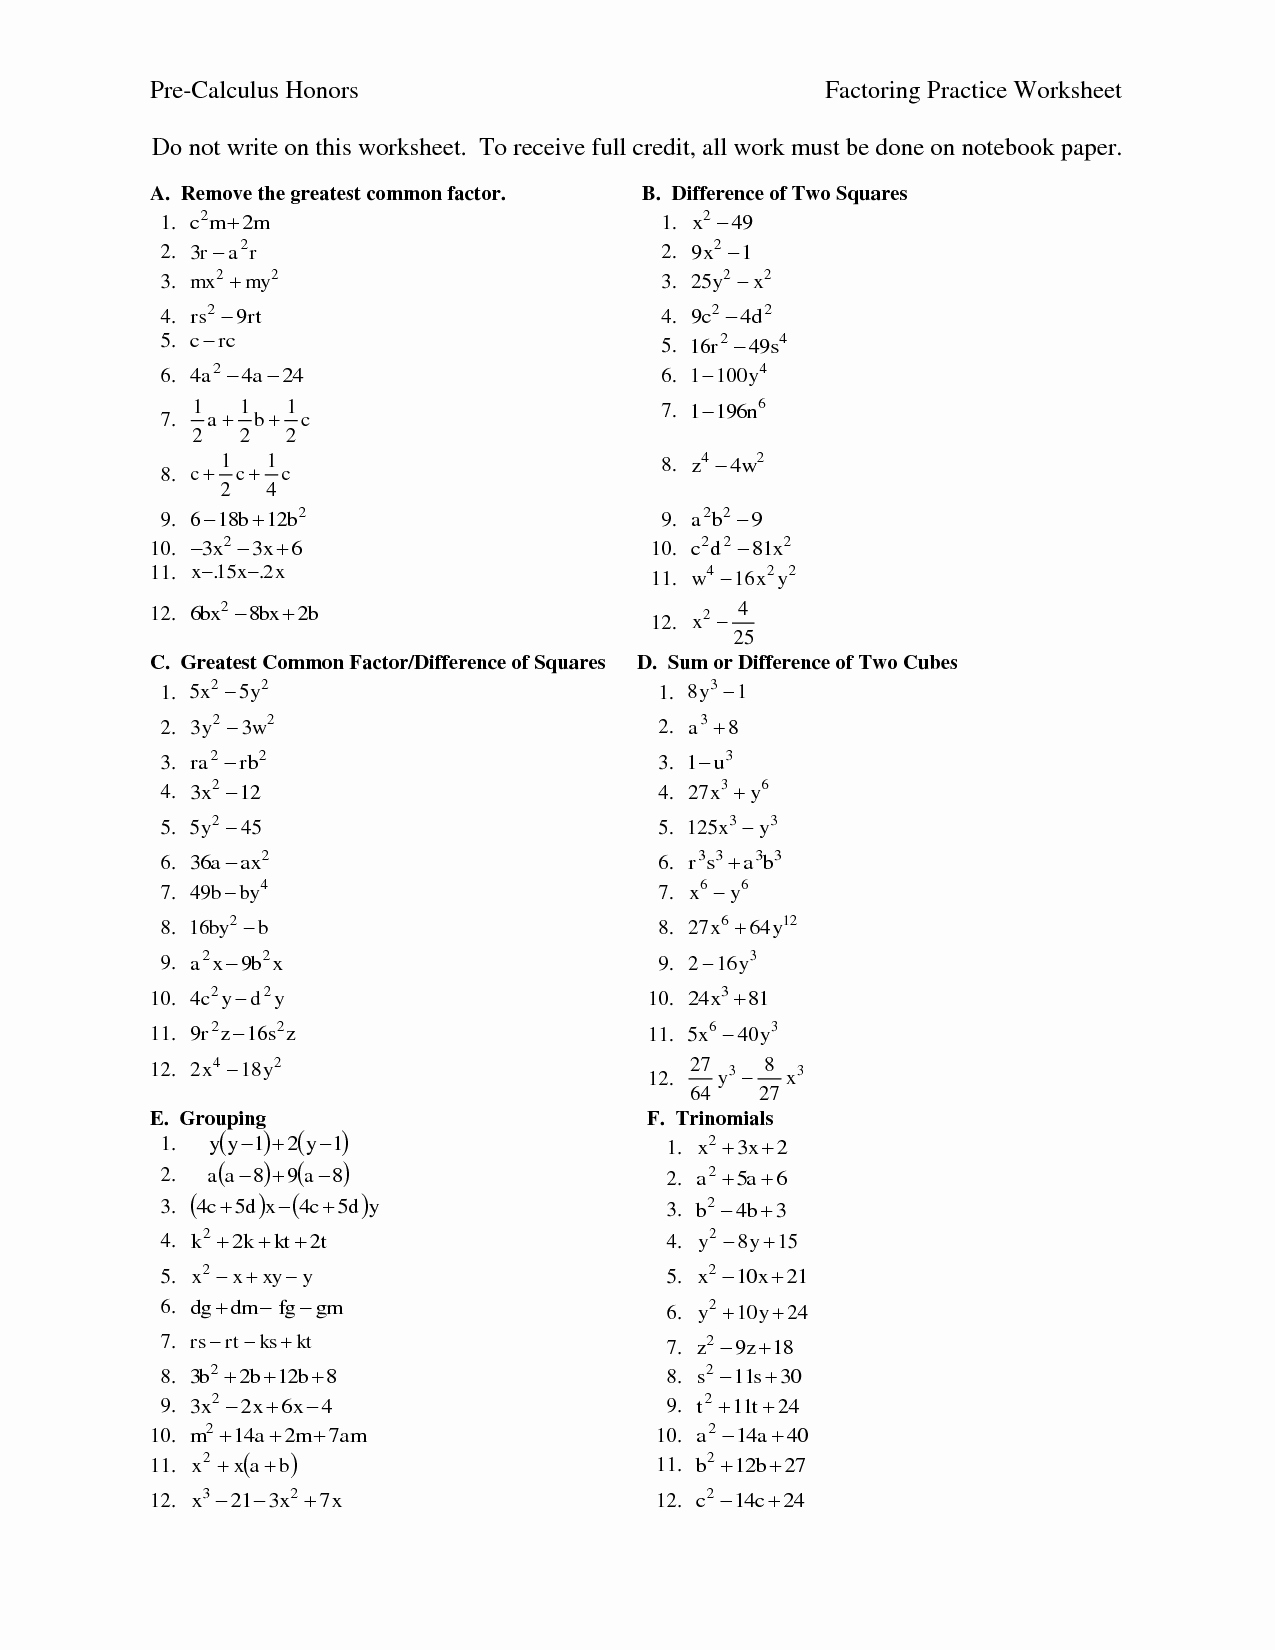 Factoring Difference Of Squares Worksheet Unique Factoring the Difference Two Squares Worksheet Answers